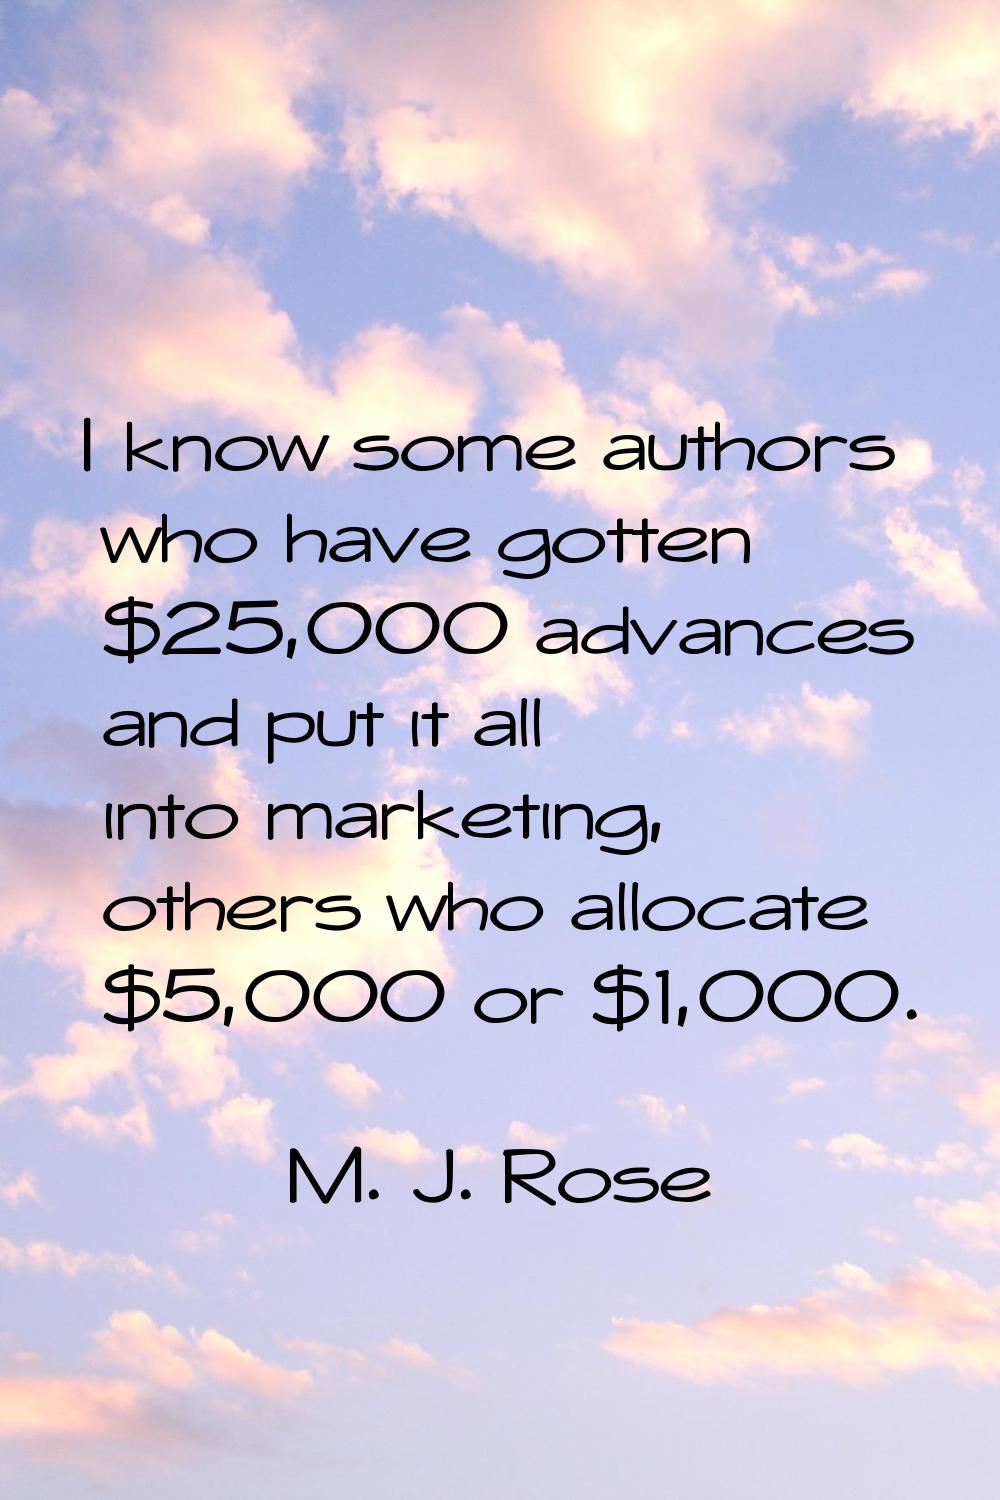 I know some authors who have gotten $25,000 advances and put it all into marketing, others who allo